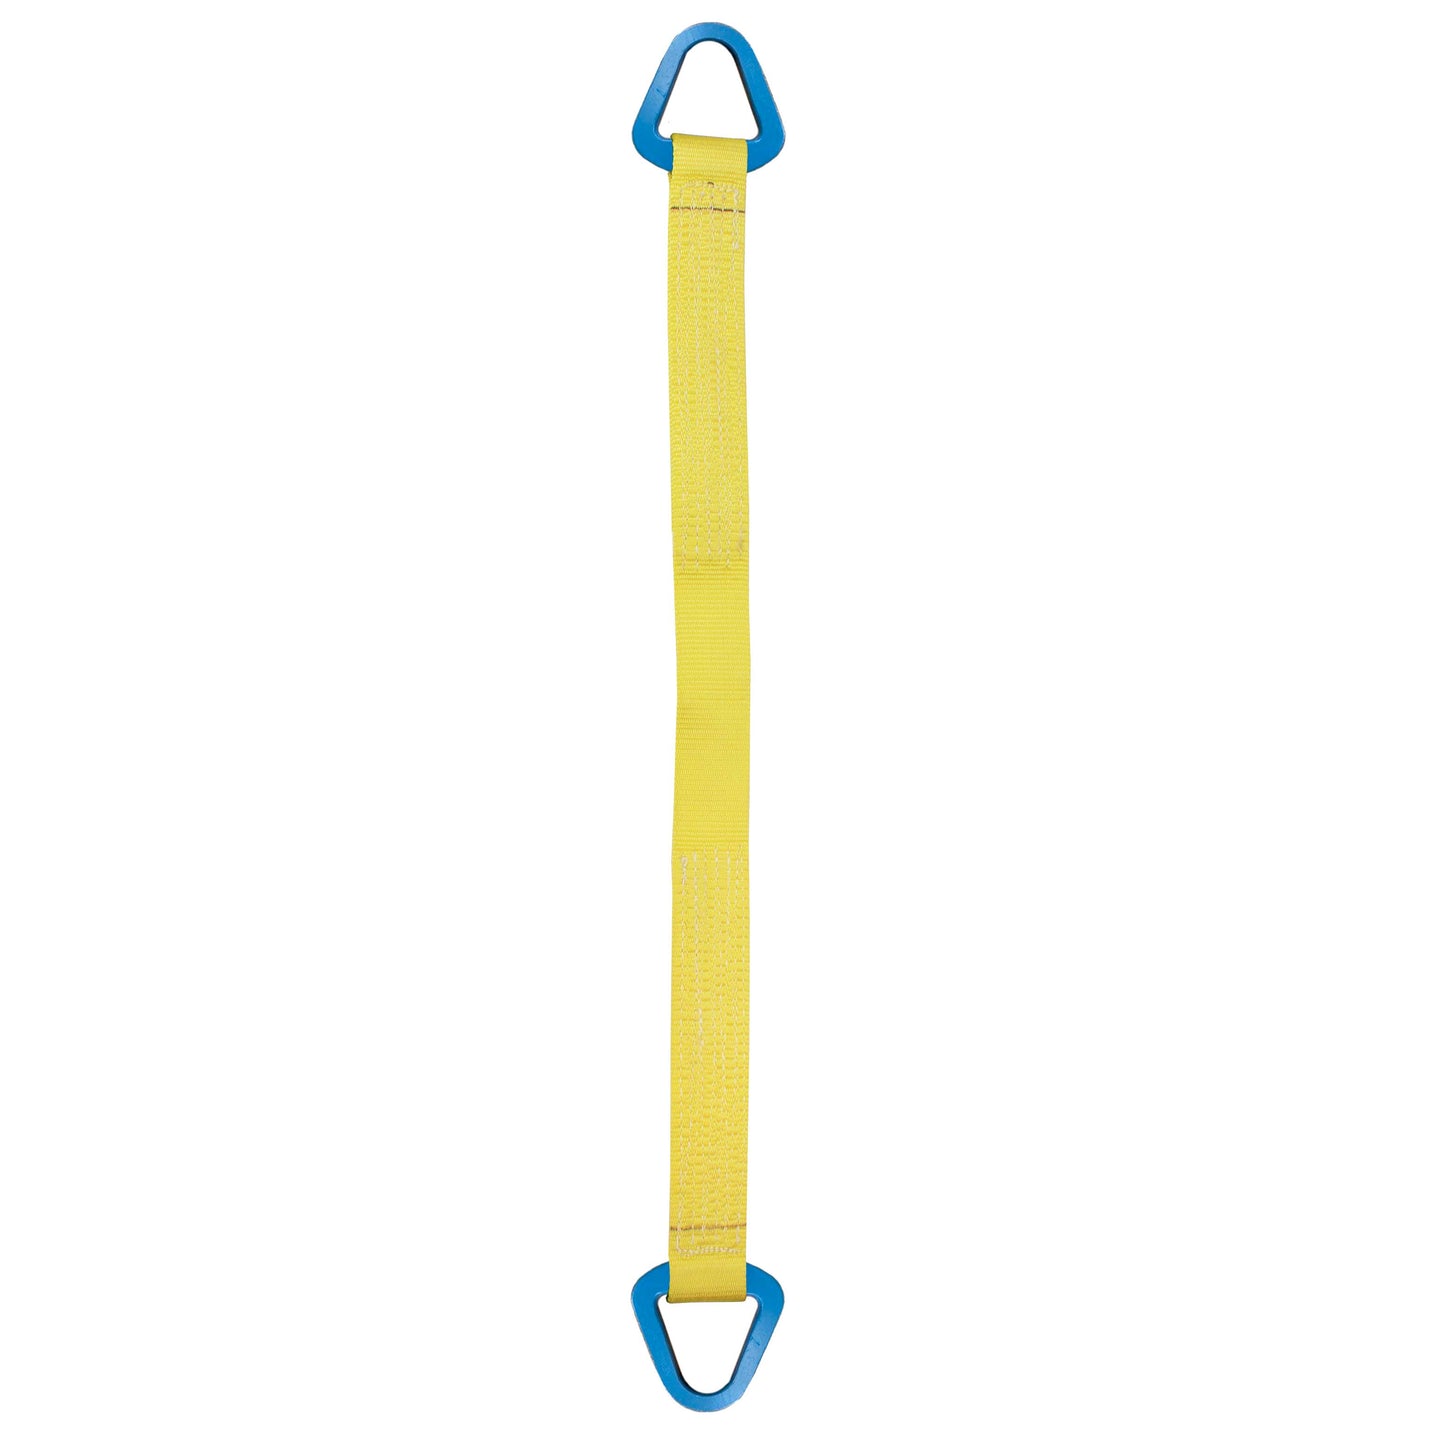 Nylon Lifting Sling Triangle 4 inch x 6 foot 2ply image 1 of 2